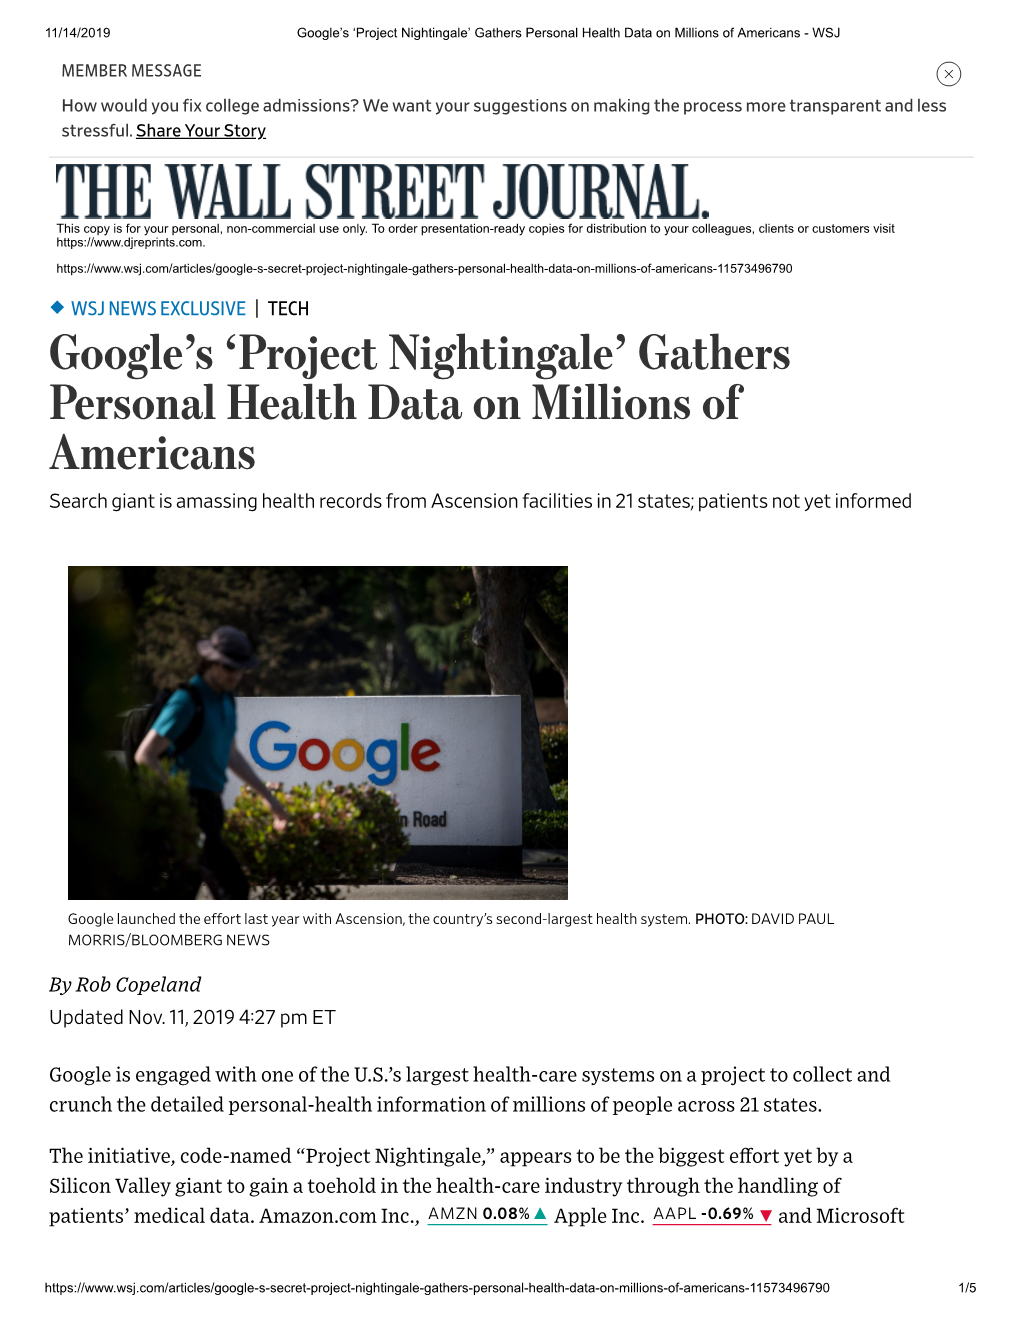 Google's 'Project Nightingale' Gathers Personal Health Data on Millions Of